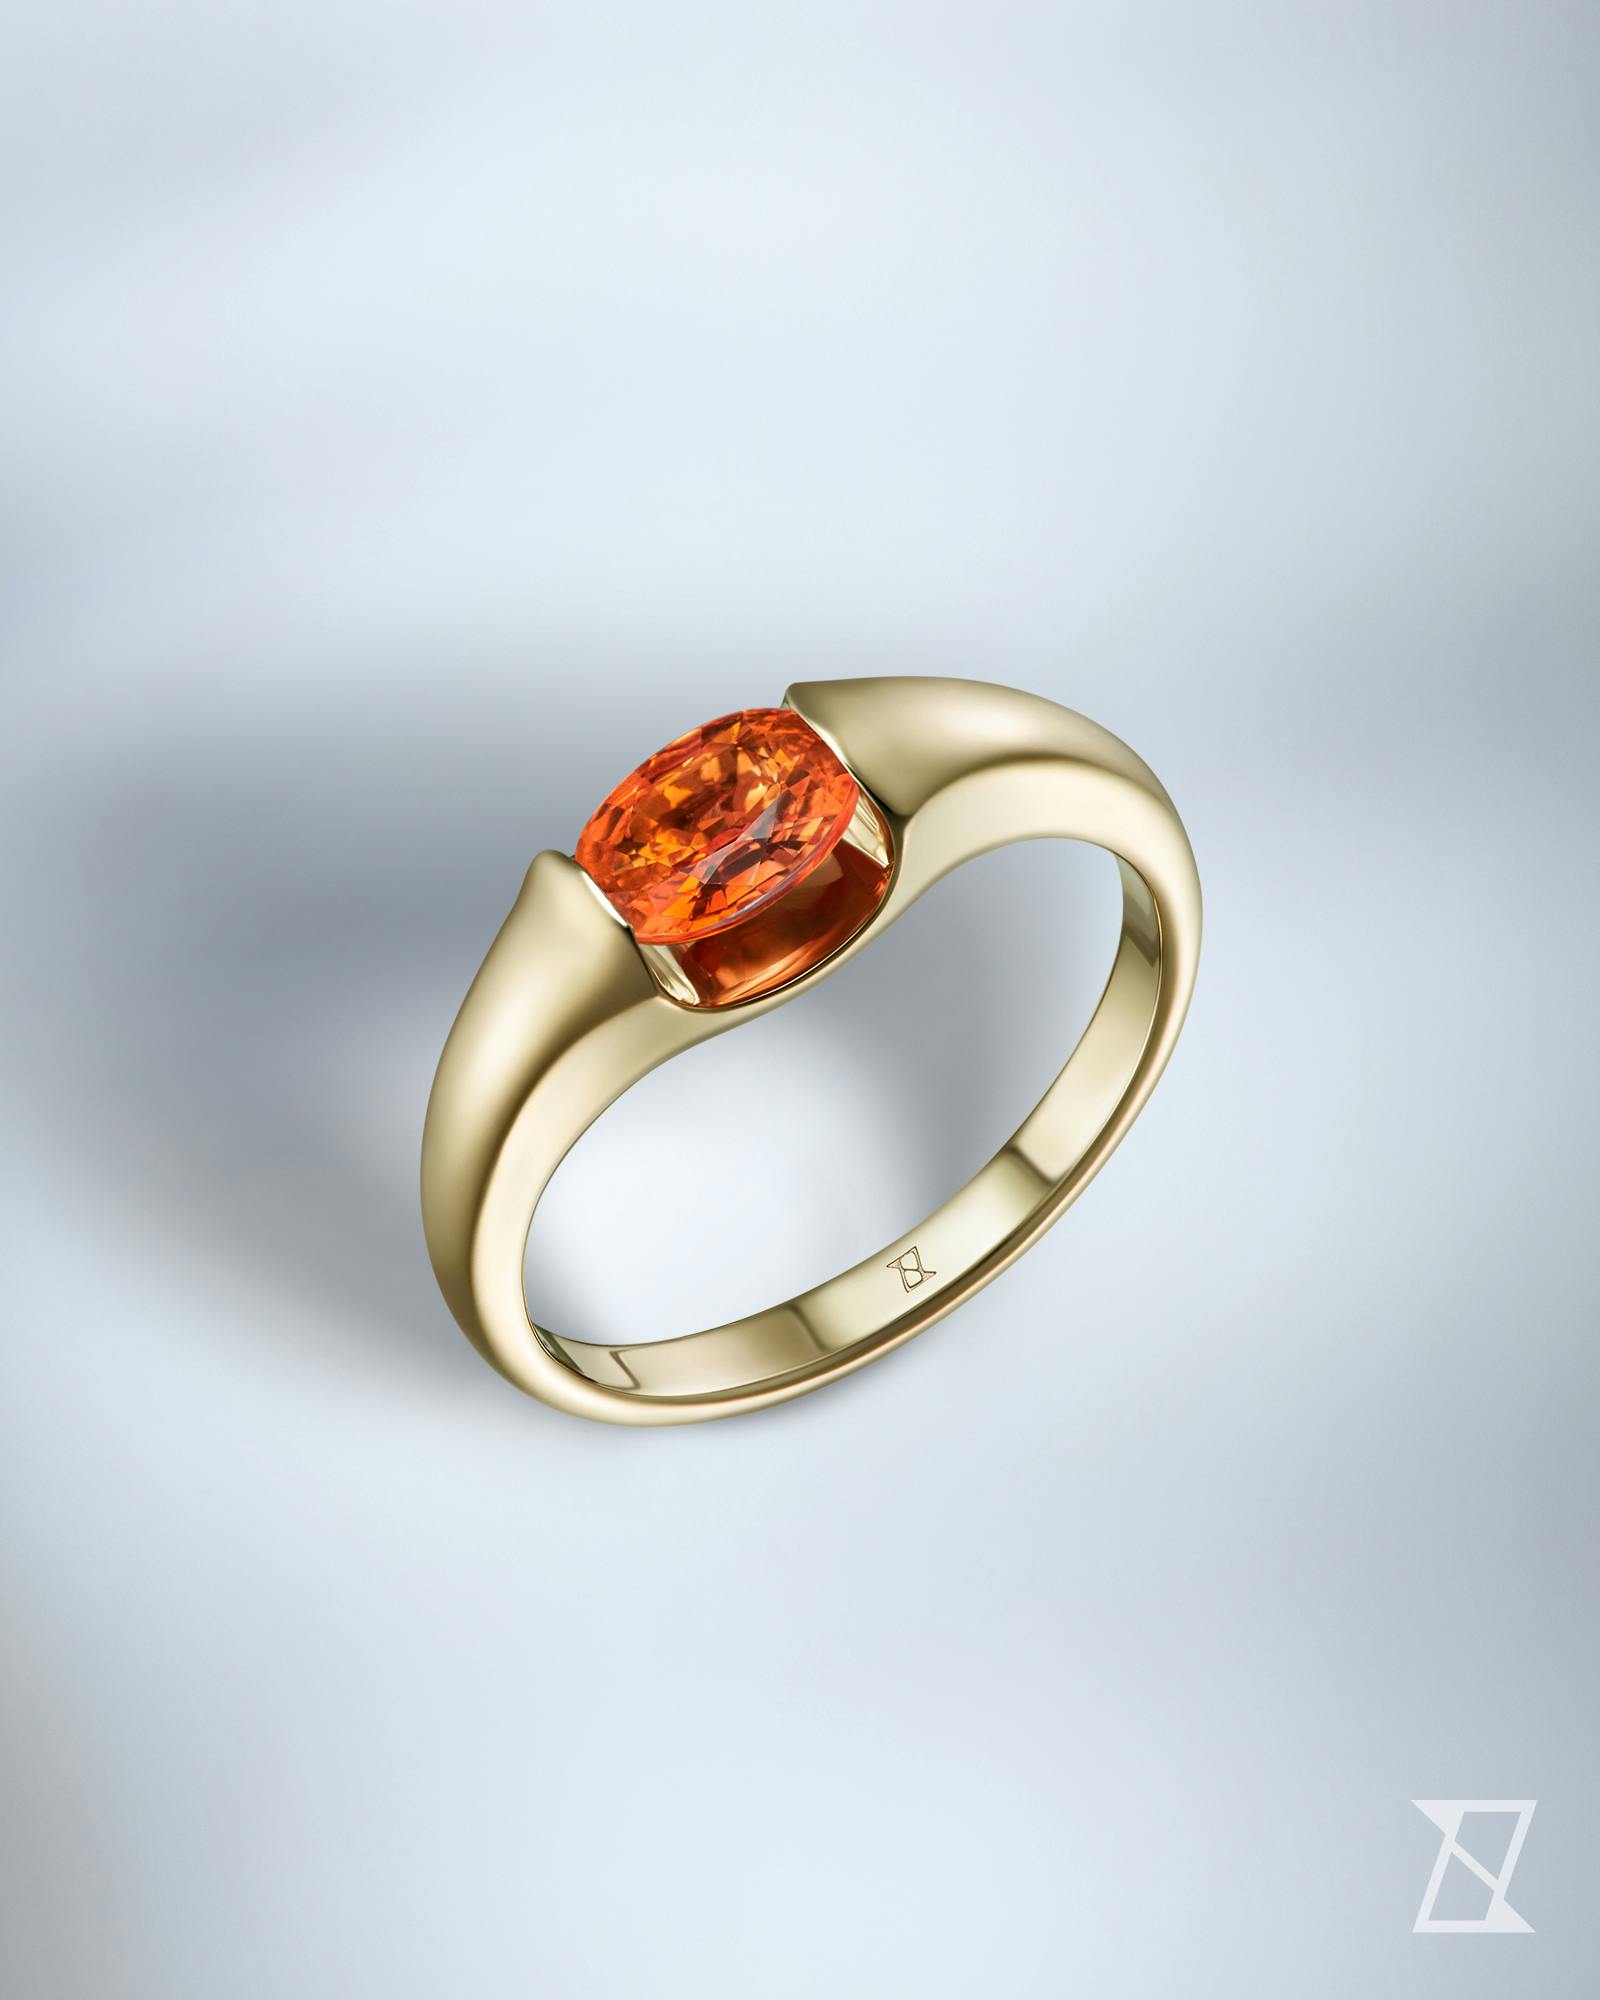 Engagement ring with an orange stone